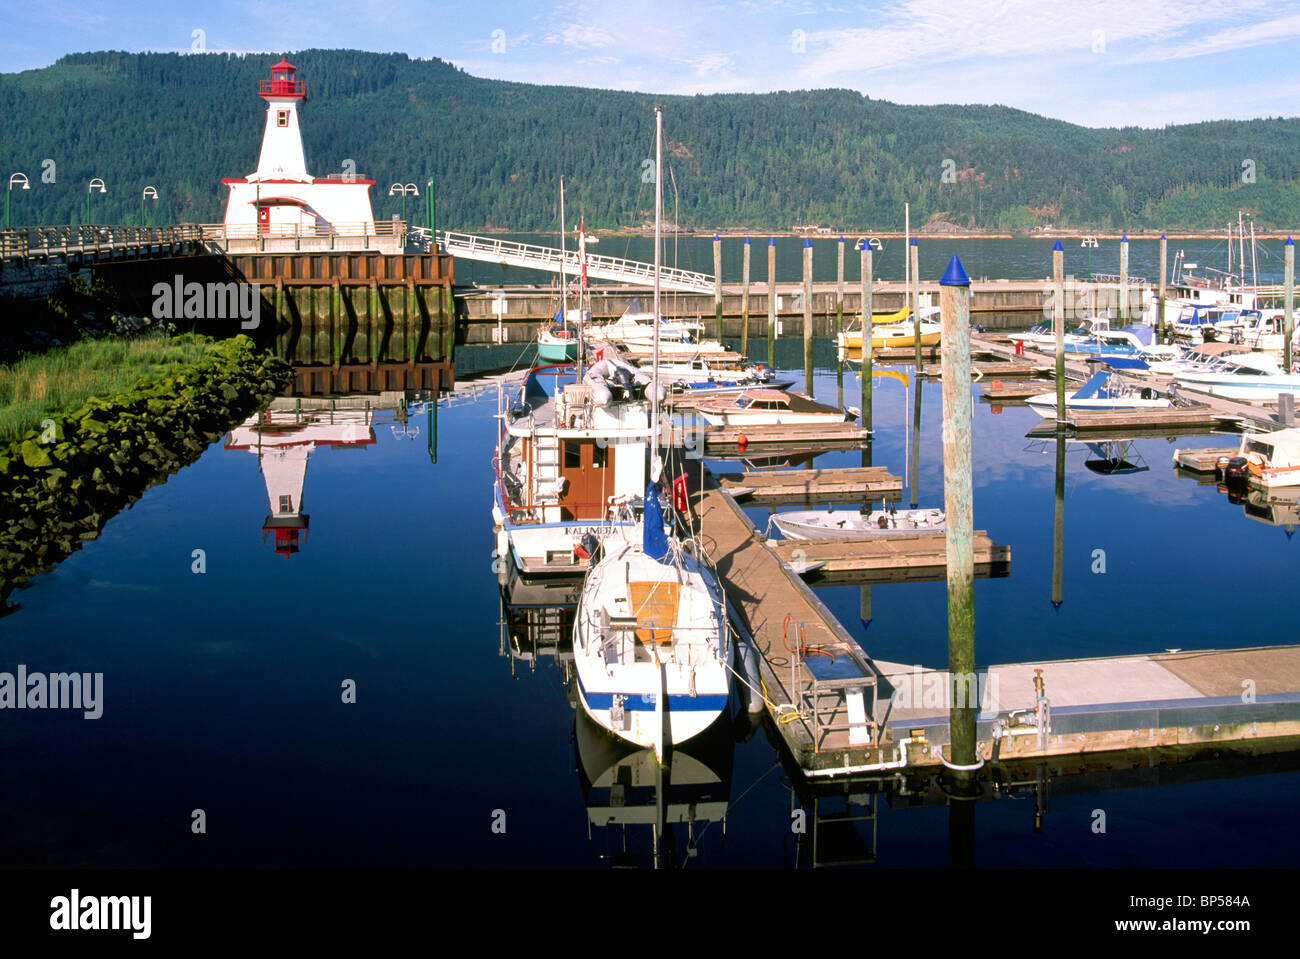 Port Alberni, BC, Vancouver Island, British Columbia, Canada - Lighthouse  at Maritime Discovery Centre, Marina in Harbour Stock Photo - Alamy